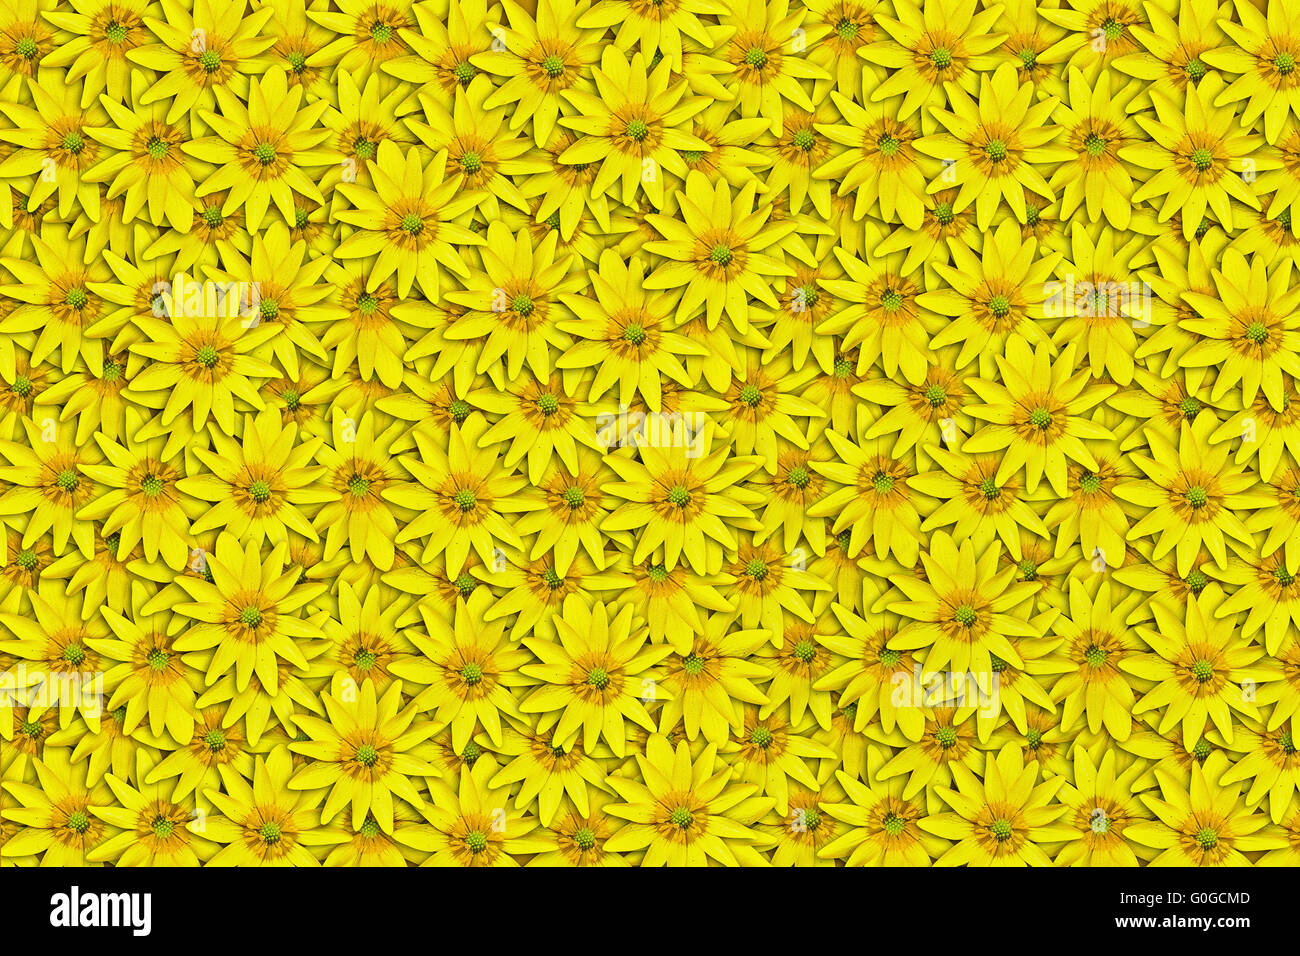 background of yellow flowers Ficaria verna Huds close up Stock Photo